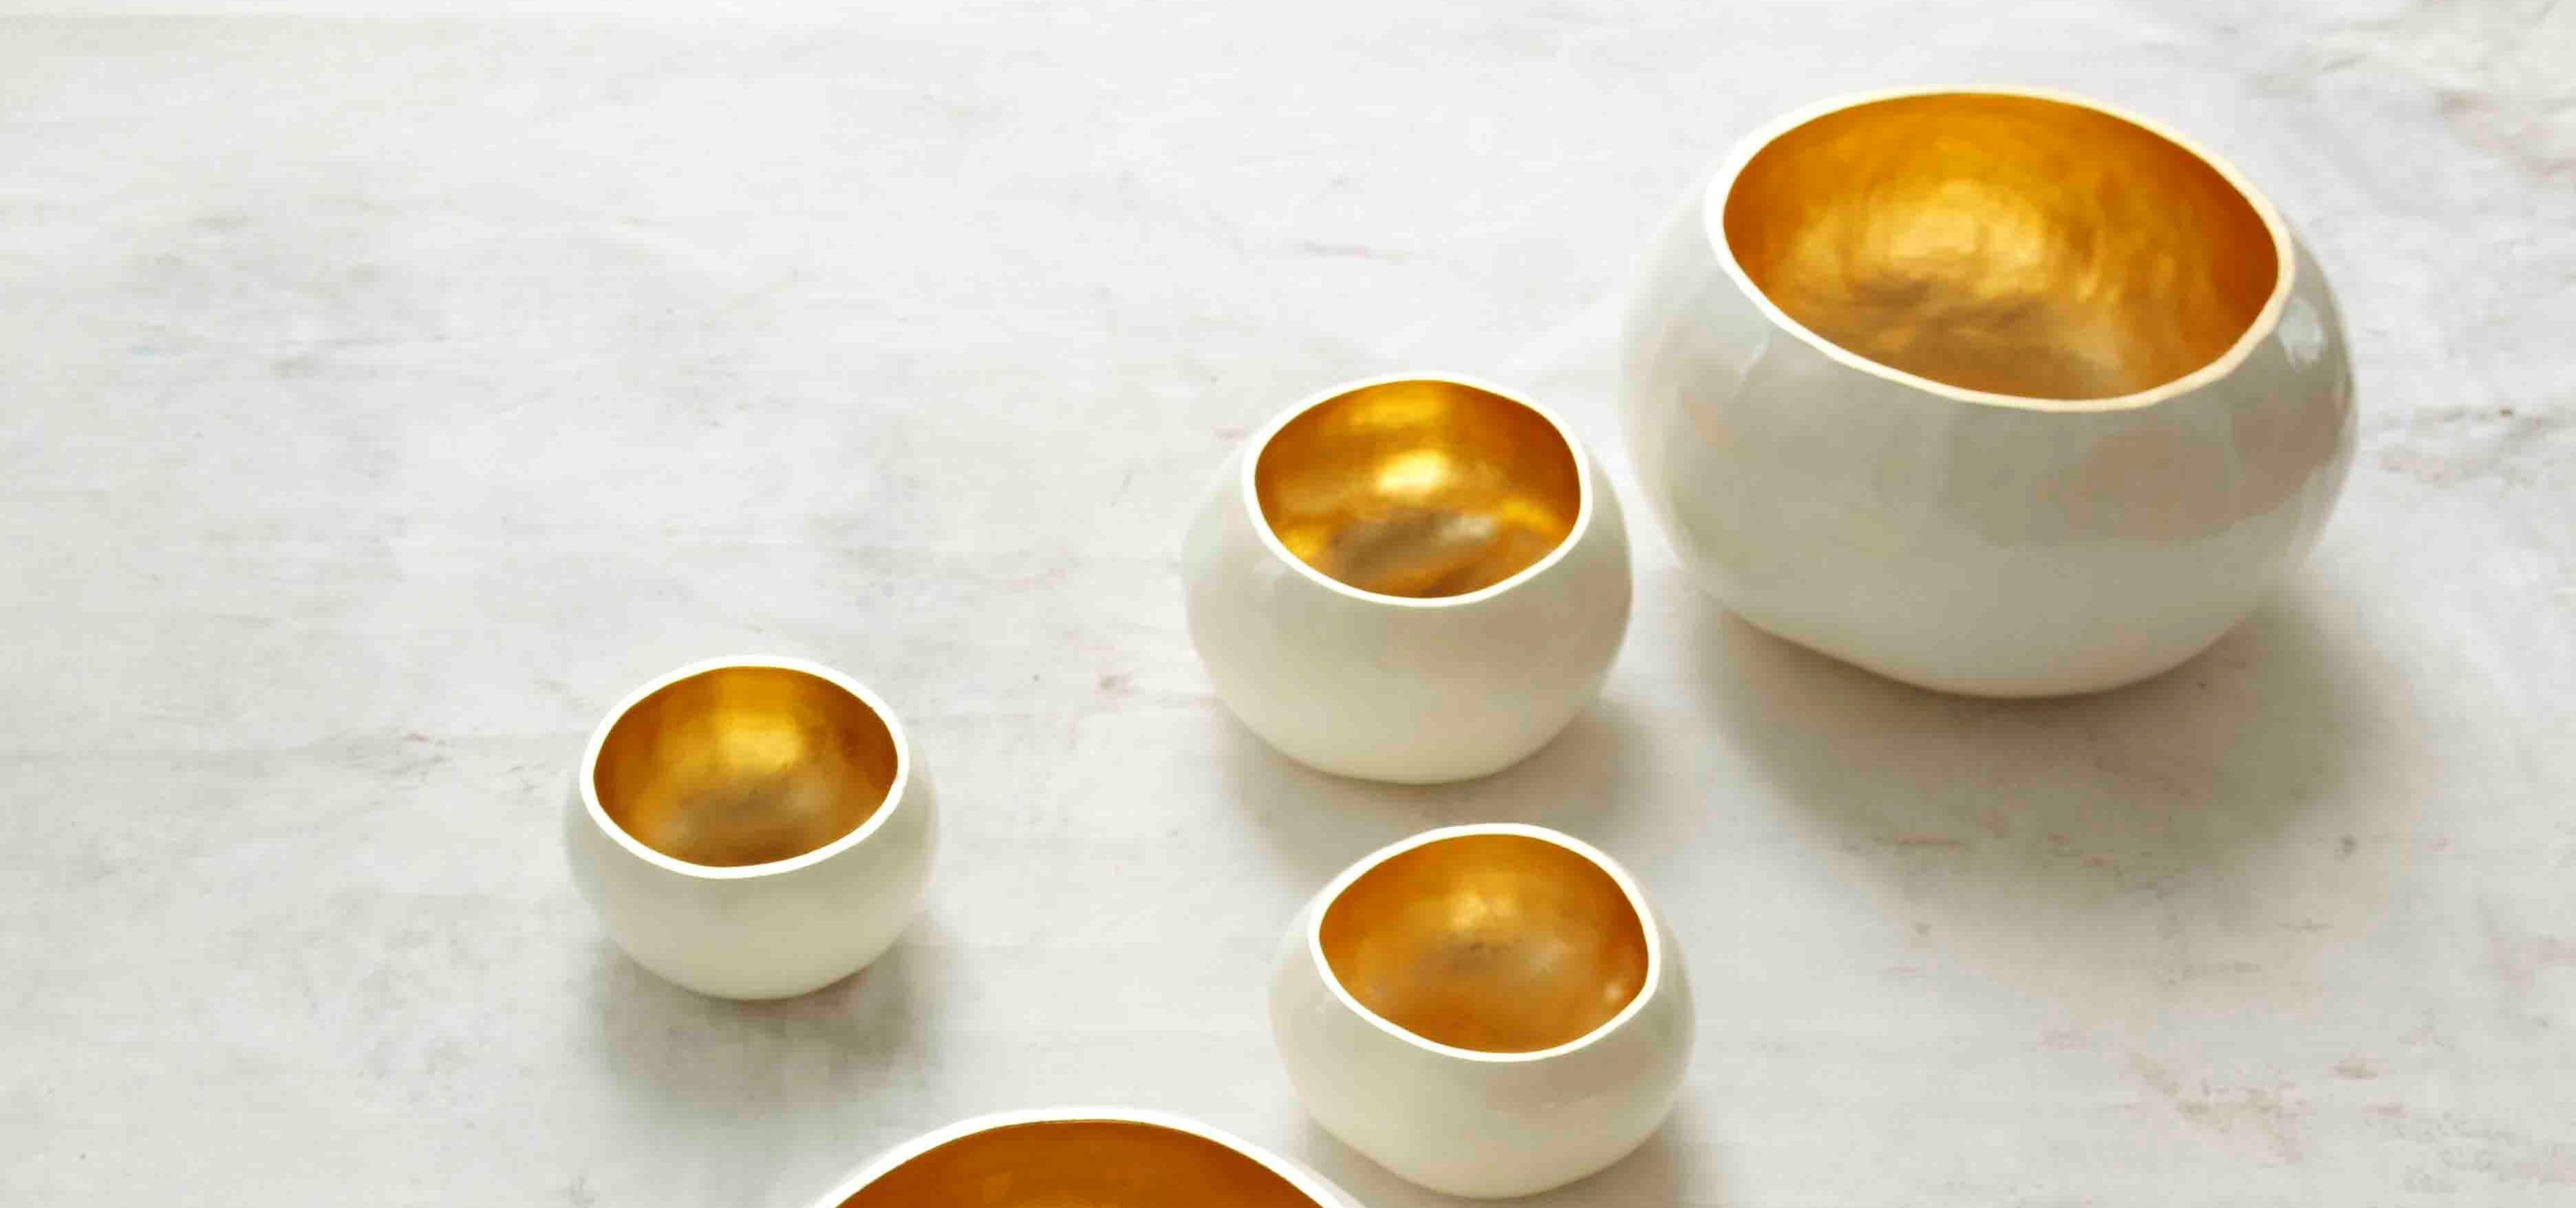 Set of 4 Mathias bowls by Onora
Dimensions:
 D 22 -25 cm
 D 18 - 21 cm
 D 16 - 17 cm
Materials: Lacquered wood, Gold Leaf
Also sold separately. 

These gourds are grown, dried, carved, cleaned, and then covered with several layers of lacquer